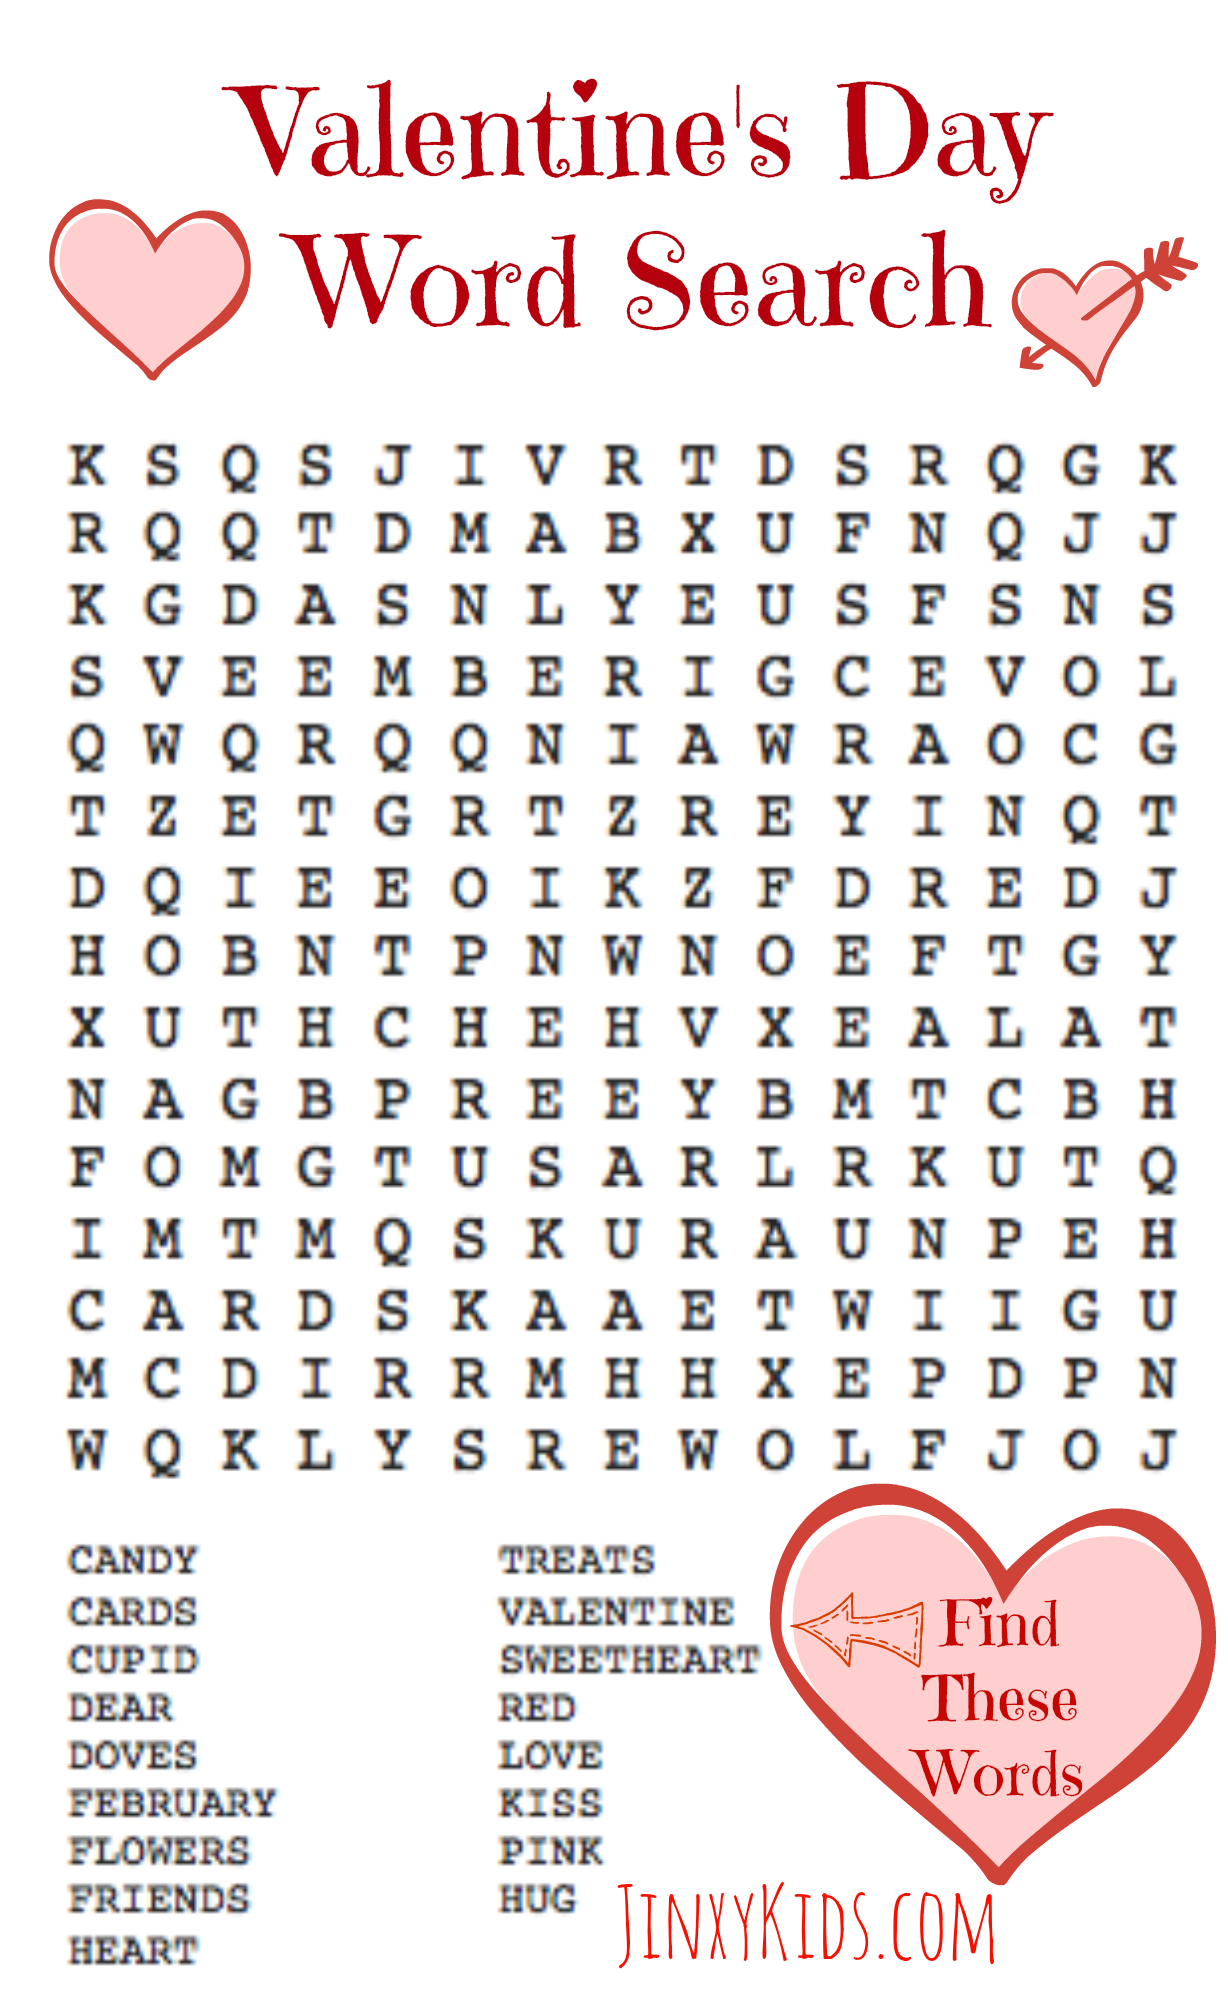 Valentine's Day Recipes, Crafts, Printables and MORE! - Thrifty Jinxy1228 x 2000